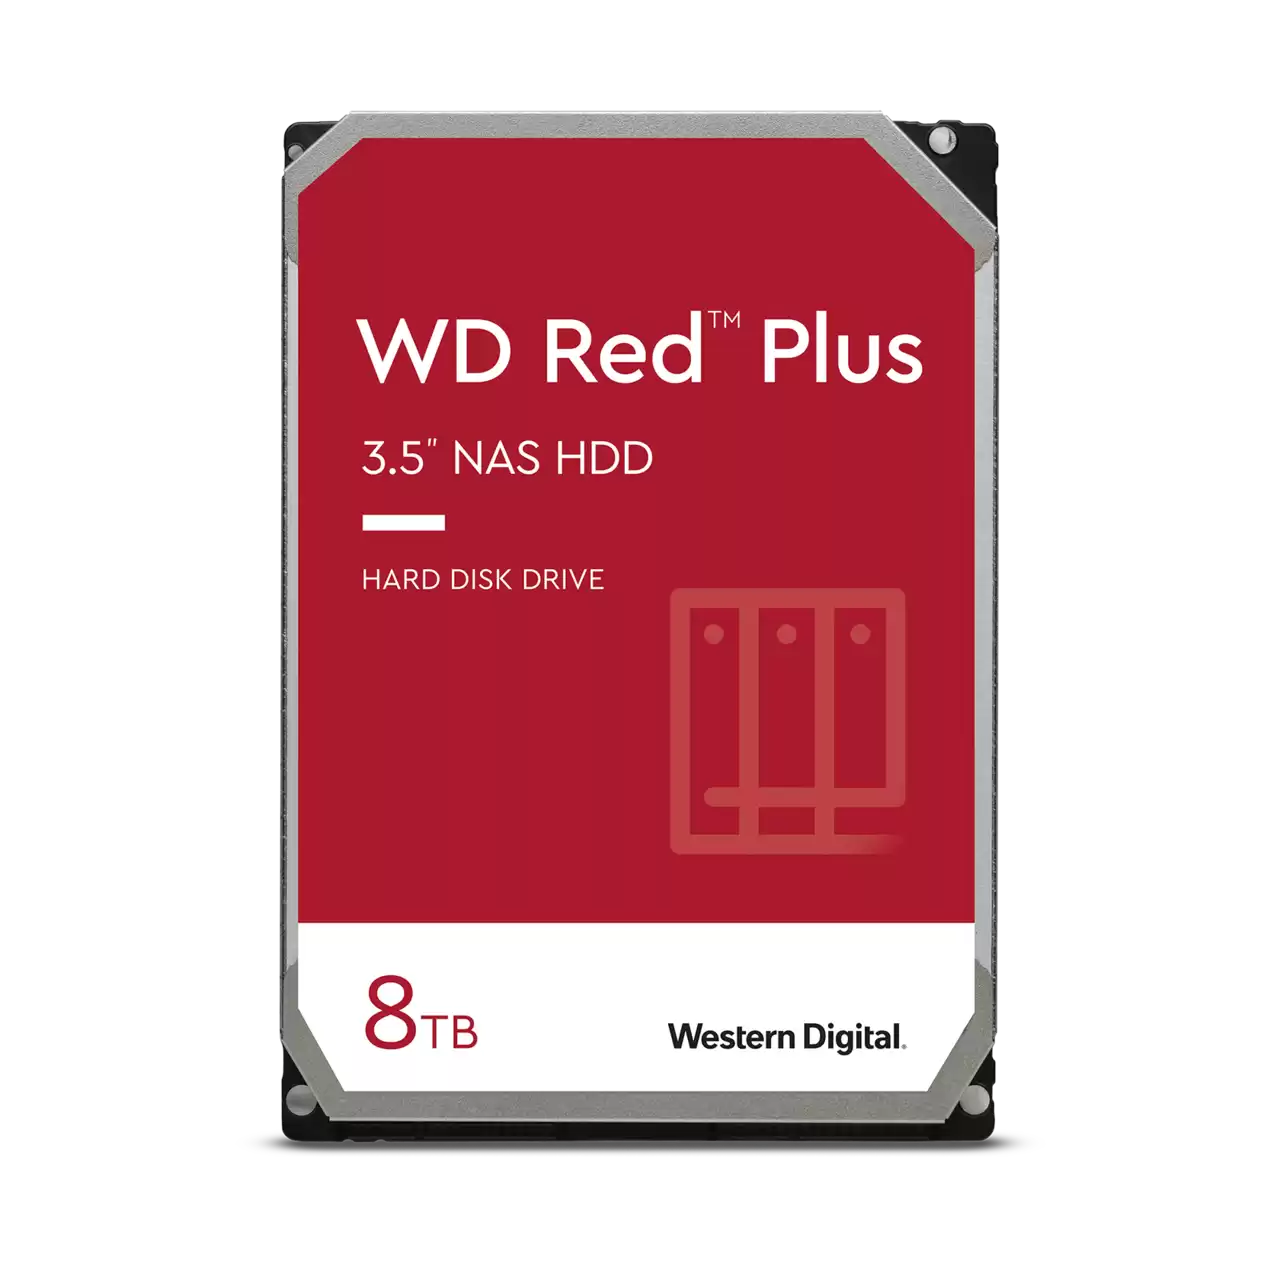 WD Red Plus 8TB 5640rpm 256MB 3.5" NAS HDD (WD80EFPX)